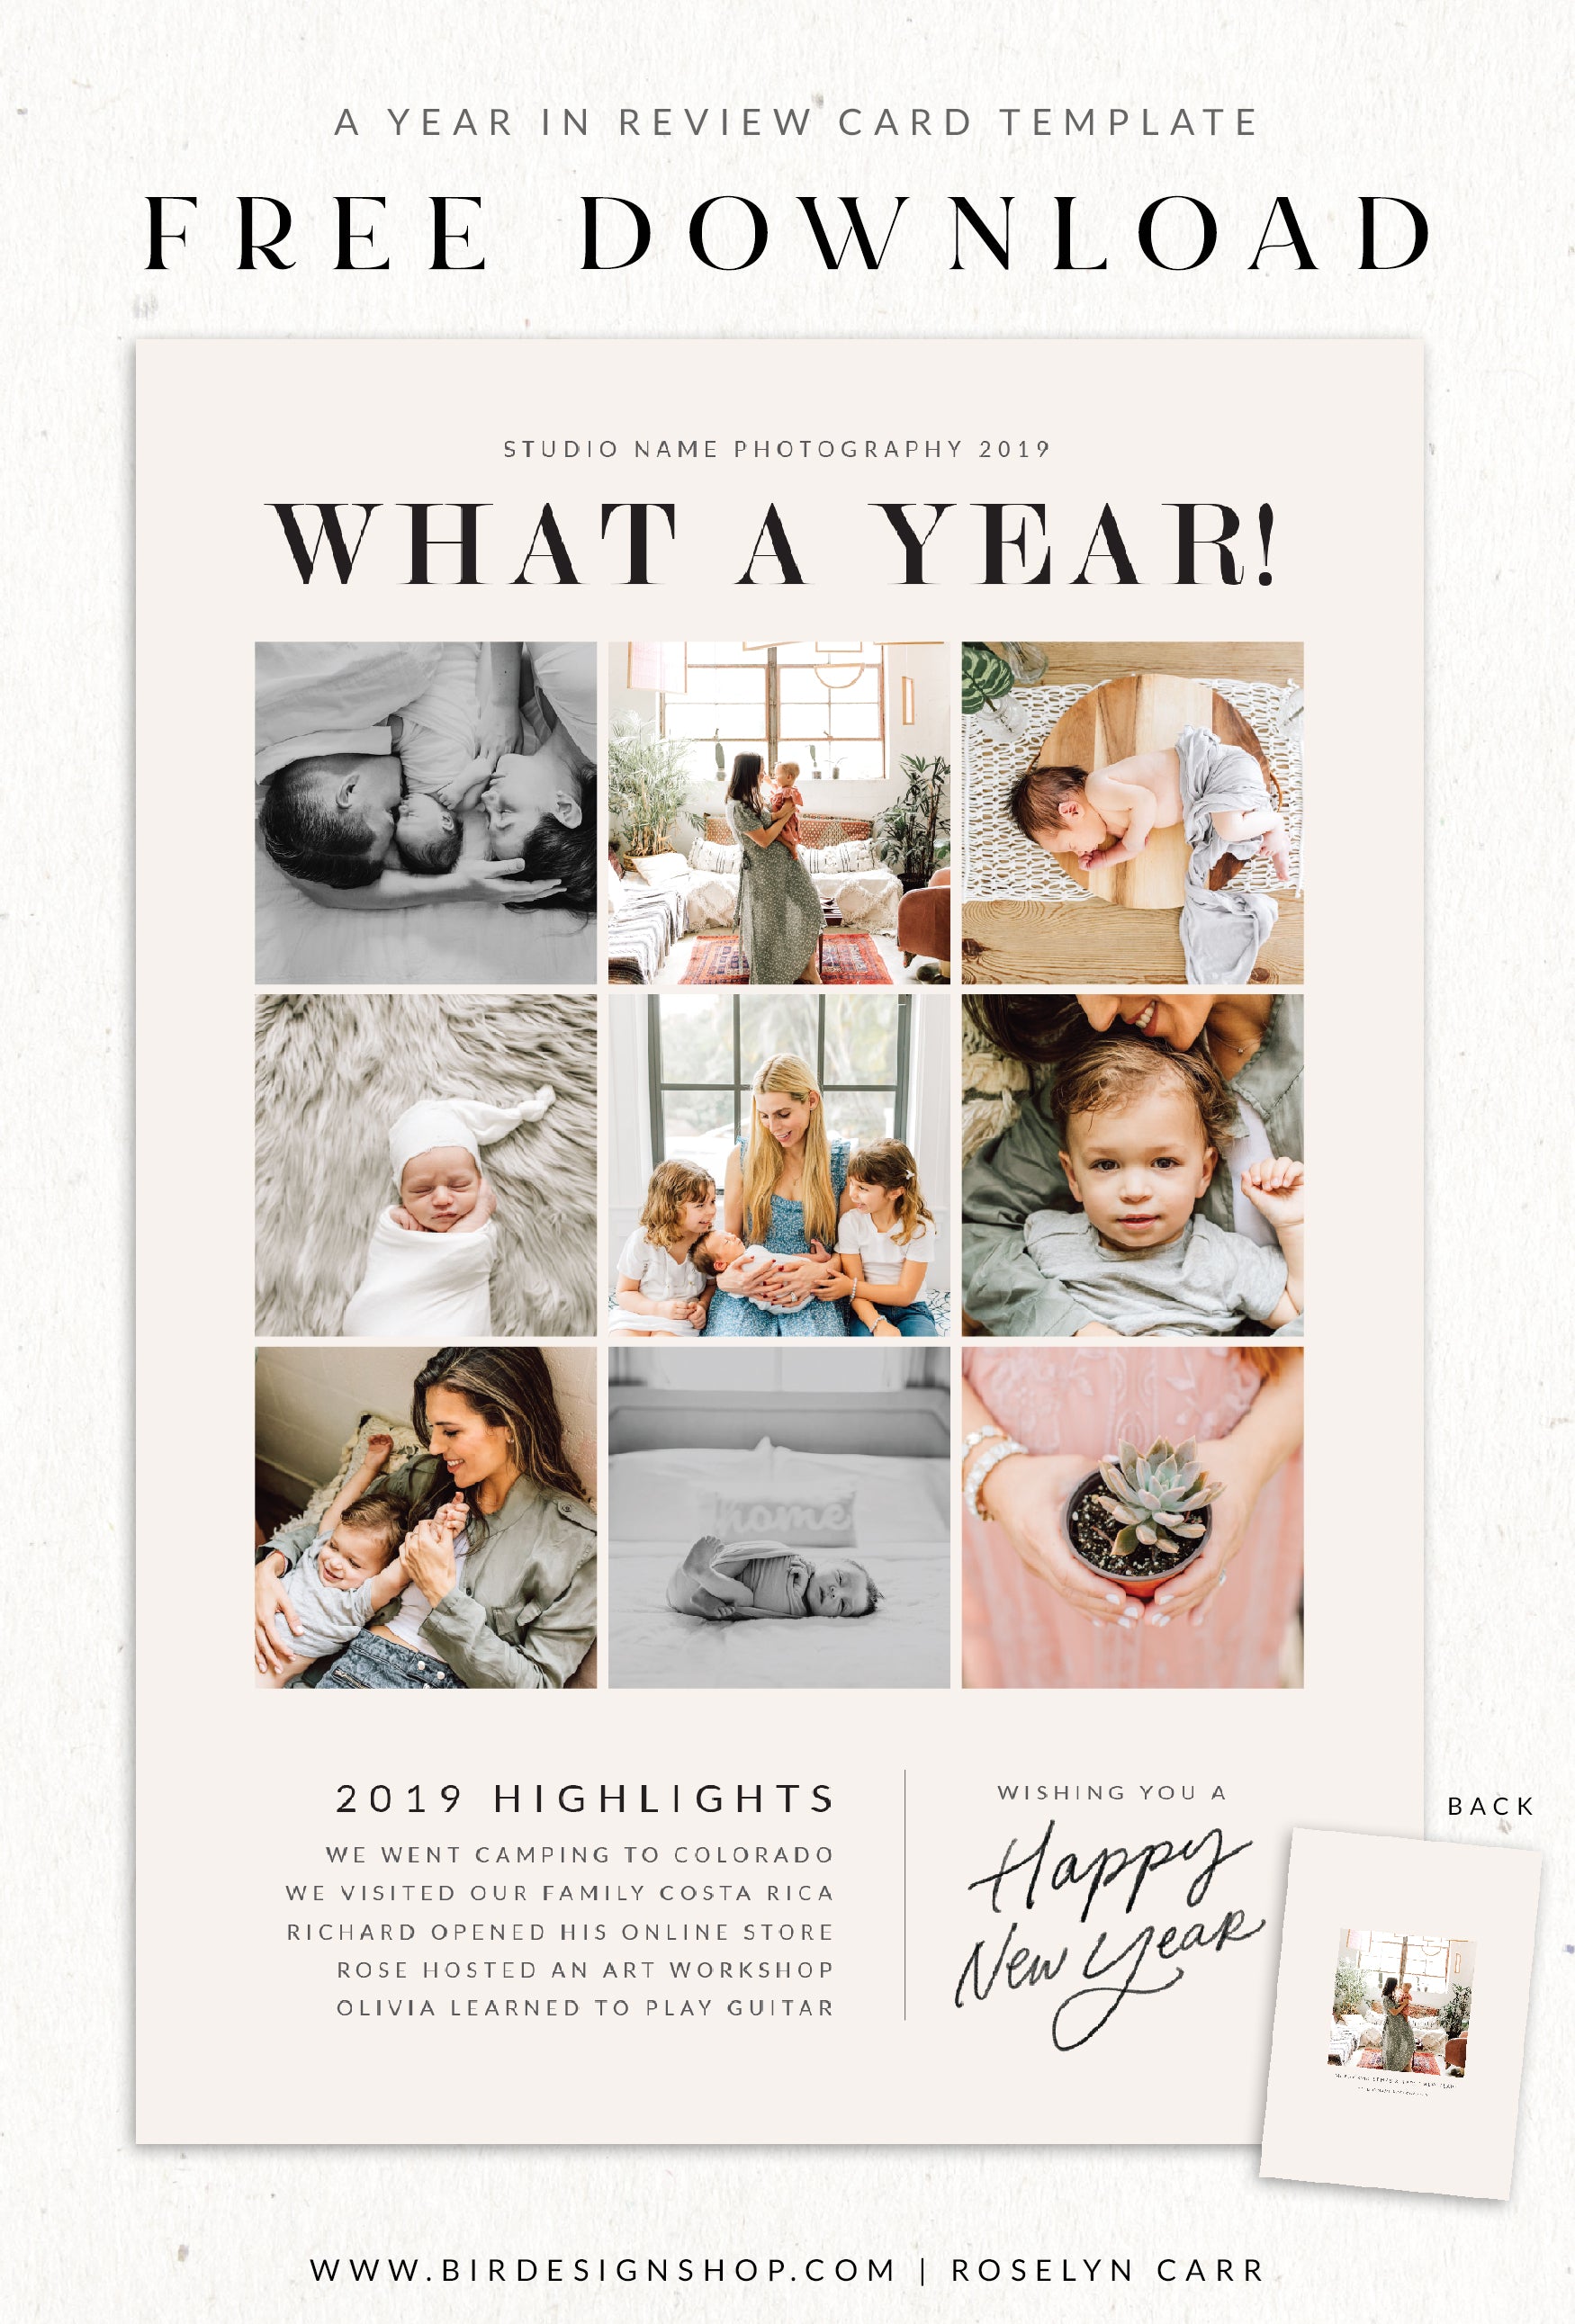 Free a year in review card template